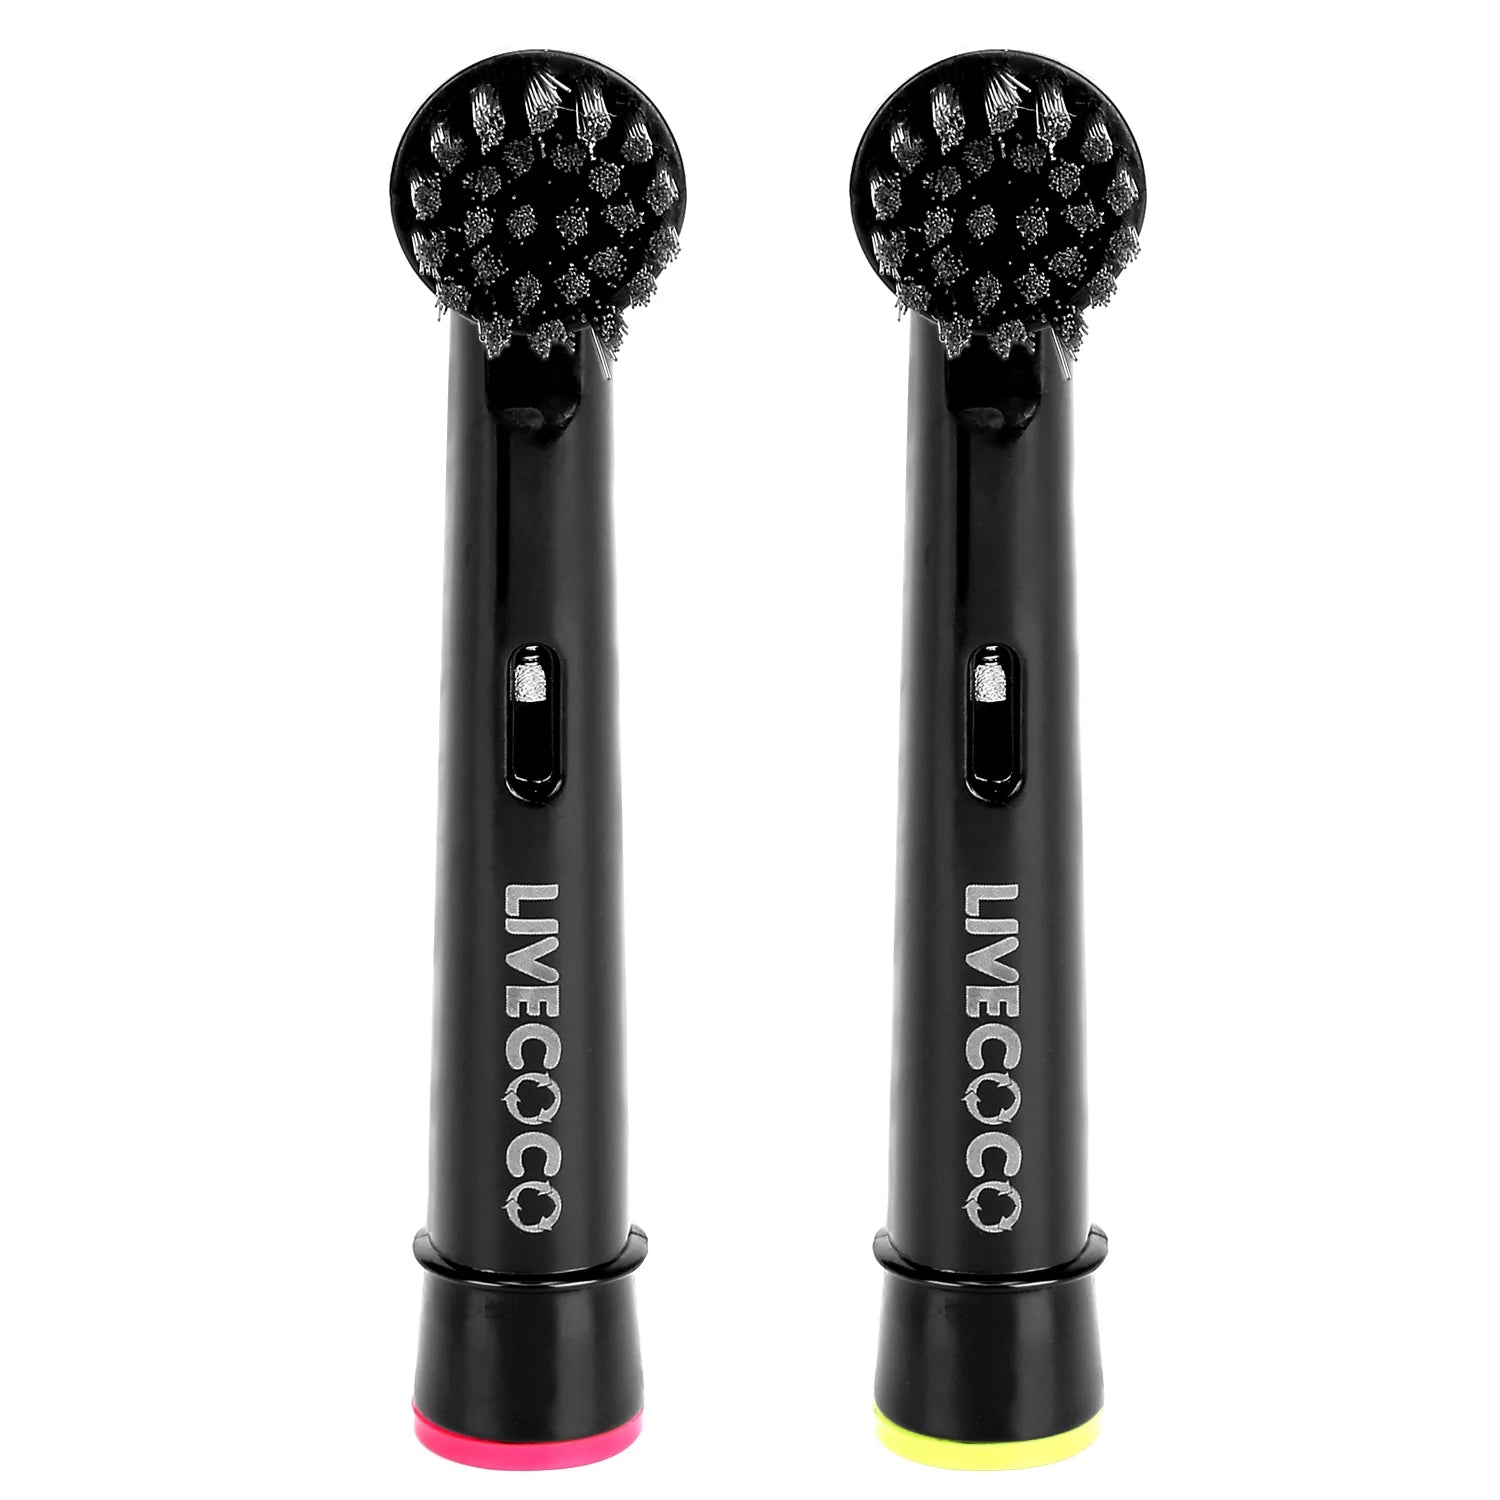 LiveCoco Recyclable Brush Heads - Charcoal Bristles